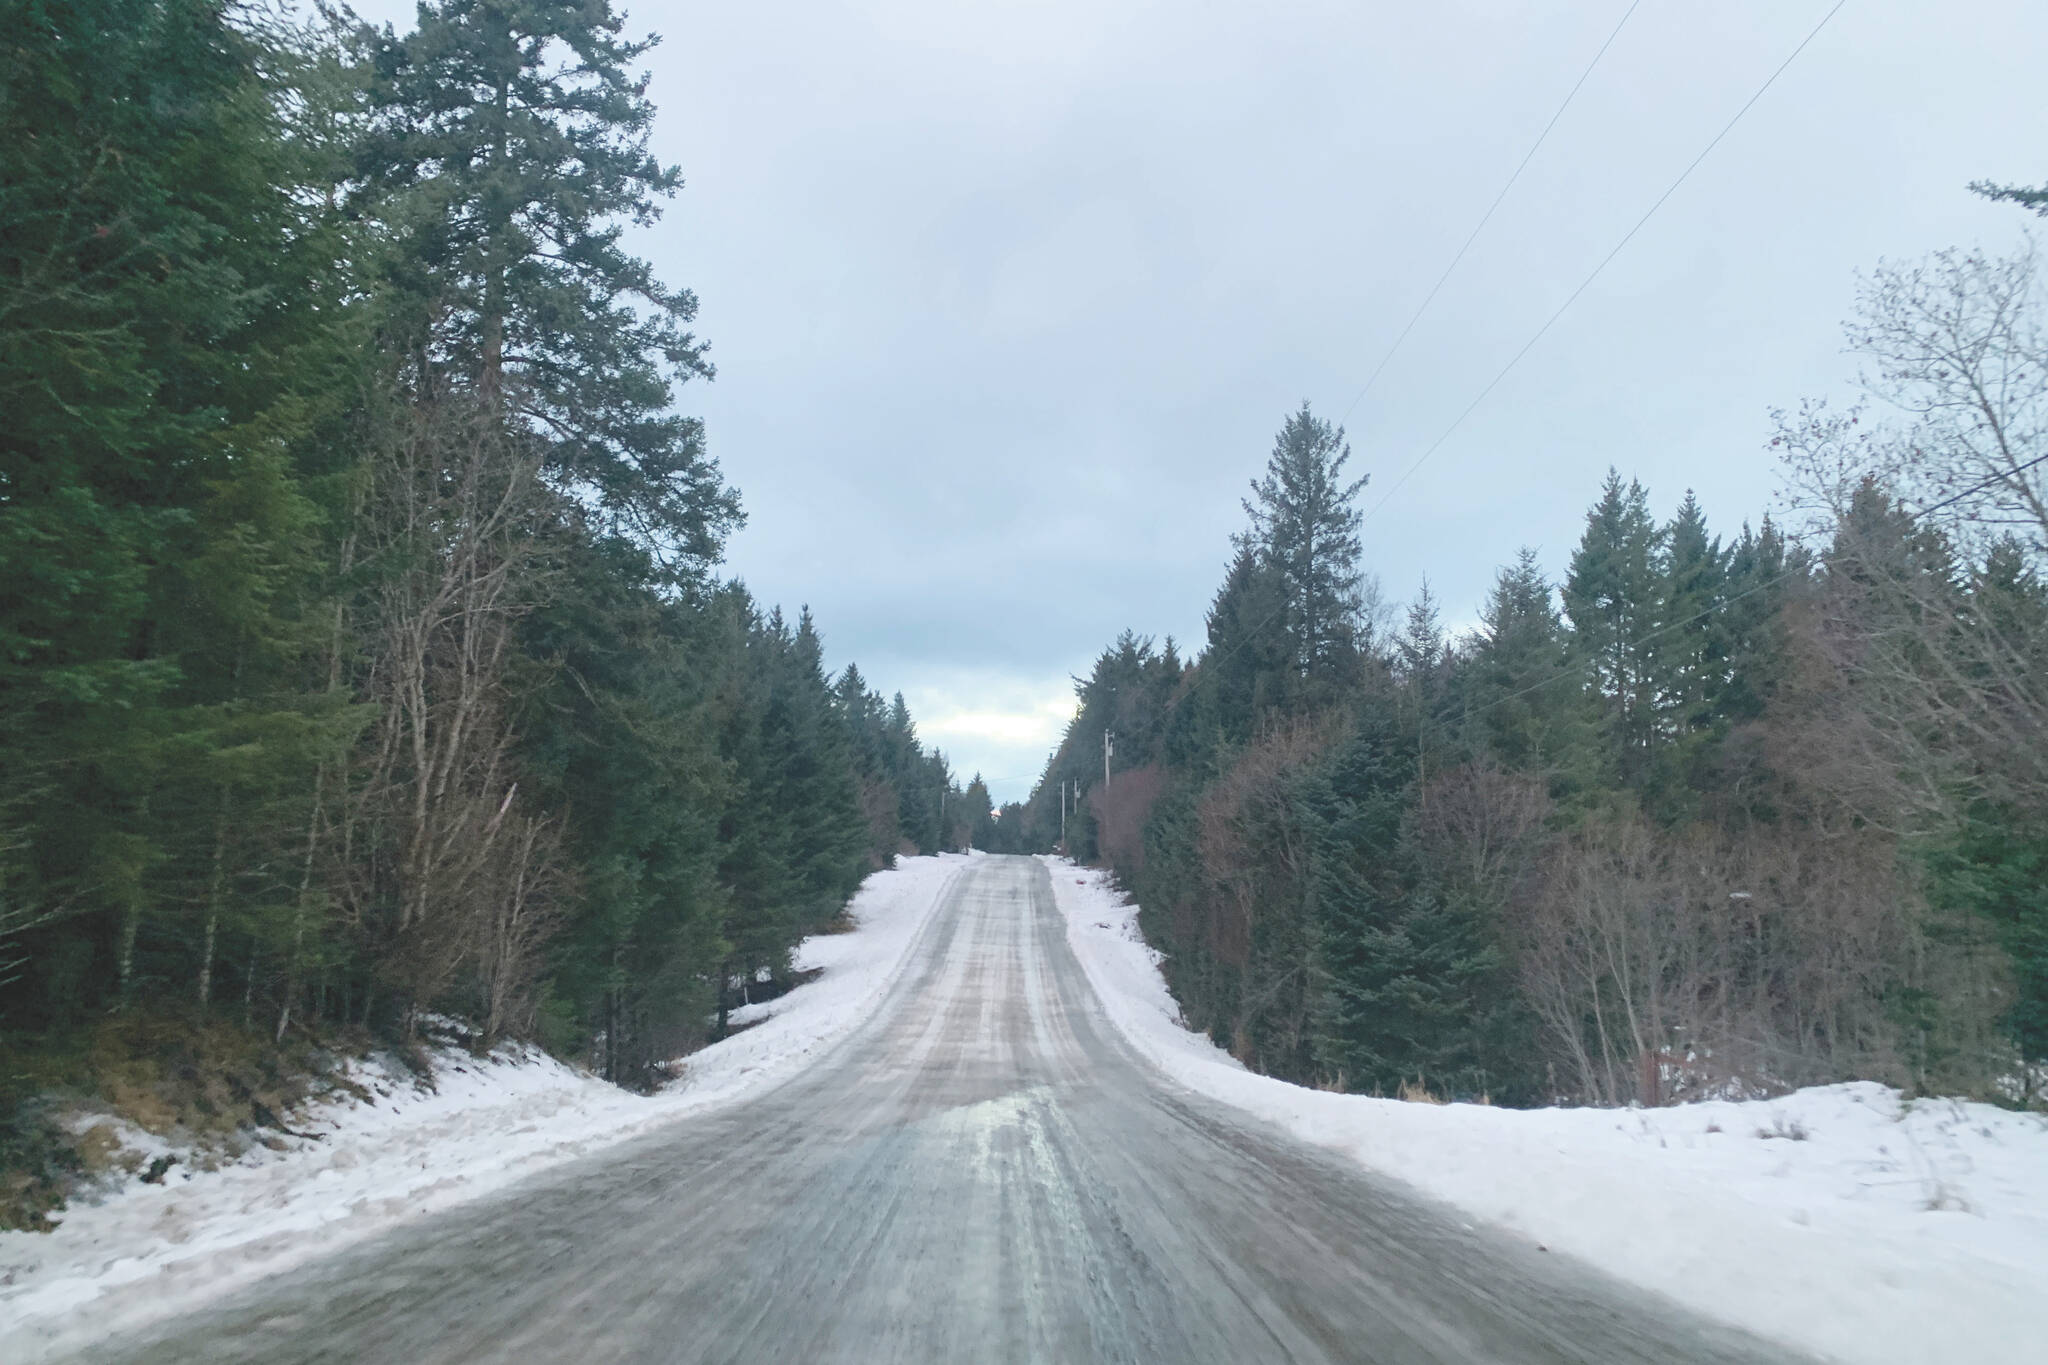 Winter meets spring road conditions, Jan. 25, 2023, in Homer, Alaska. (Photo by Christina Whiting/Homer News)